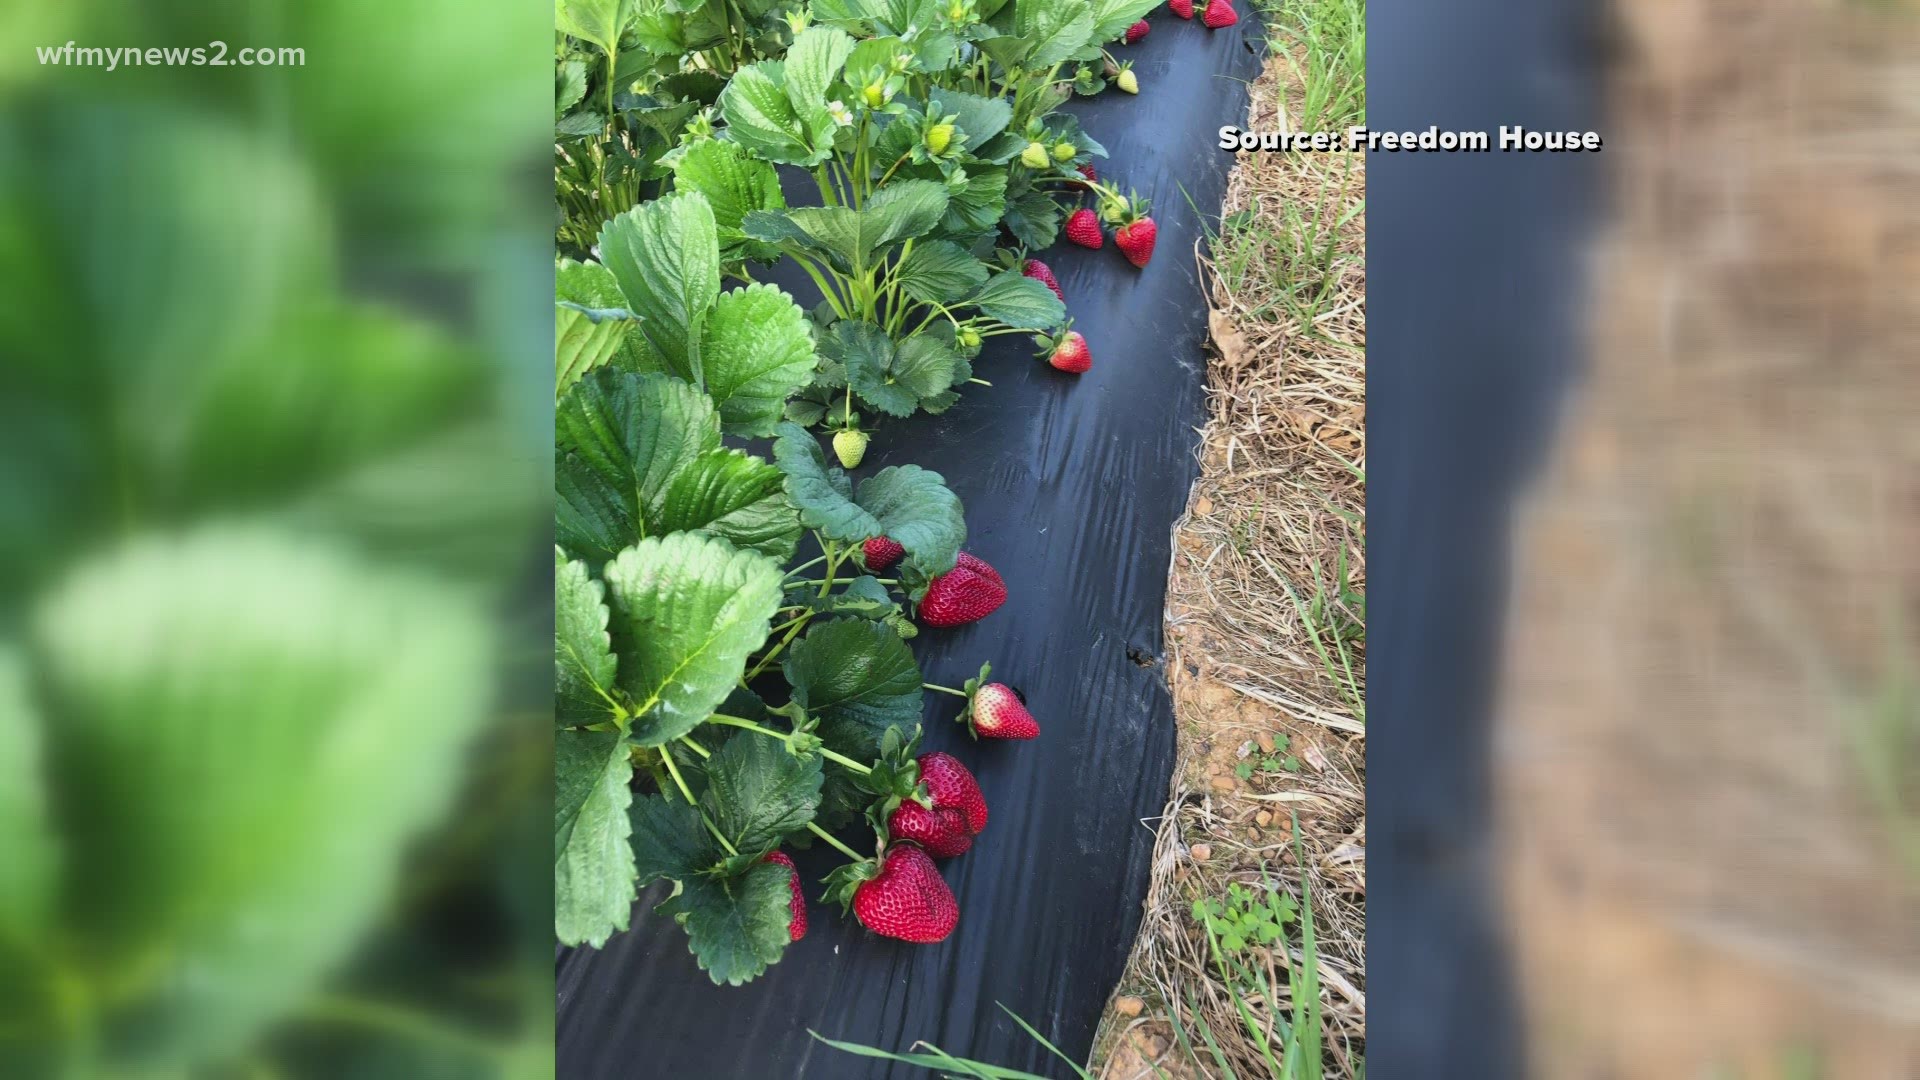 Freedom House Farm in Summerfield sells strawberries and puts the money to a great cause.